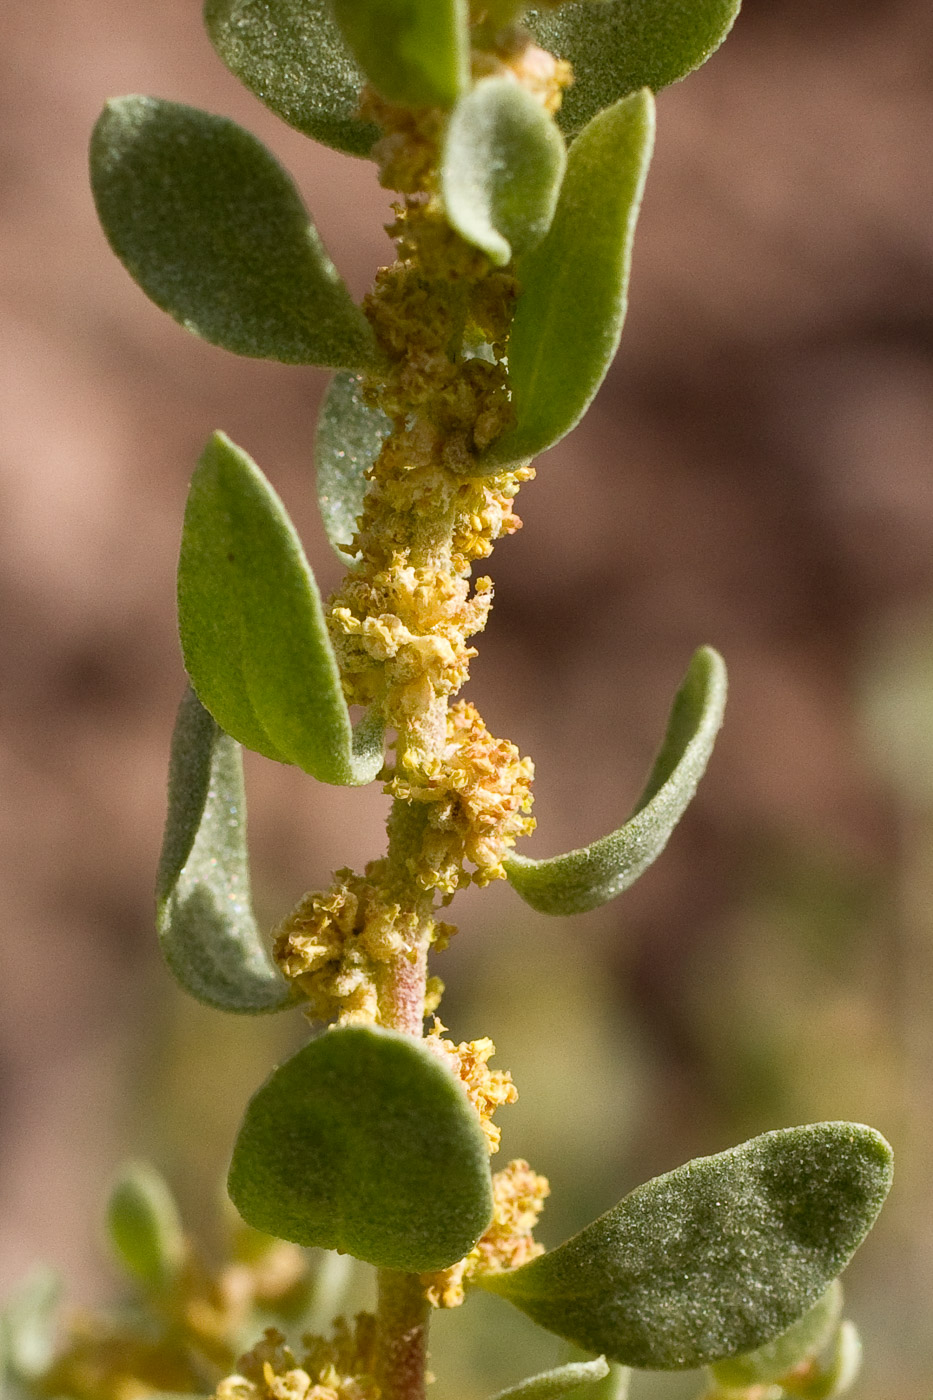 Small yellow flowers adjacent to stem; light green, fuzzy leaves are upturned